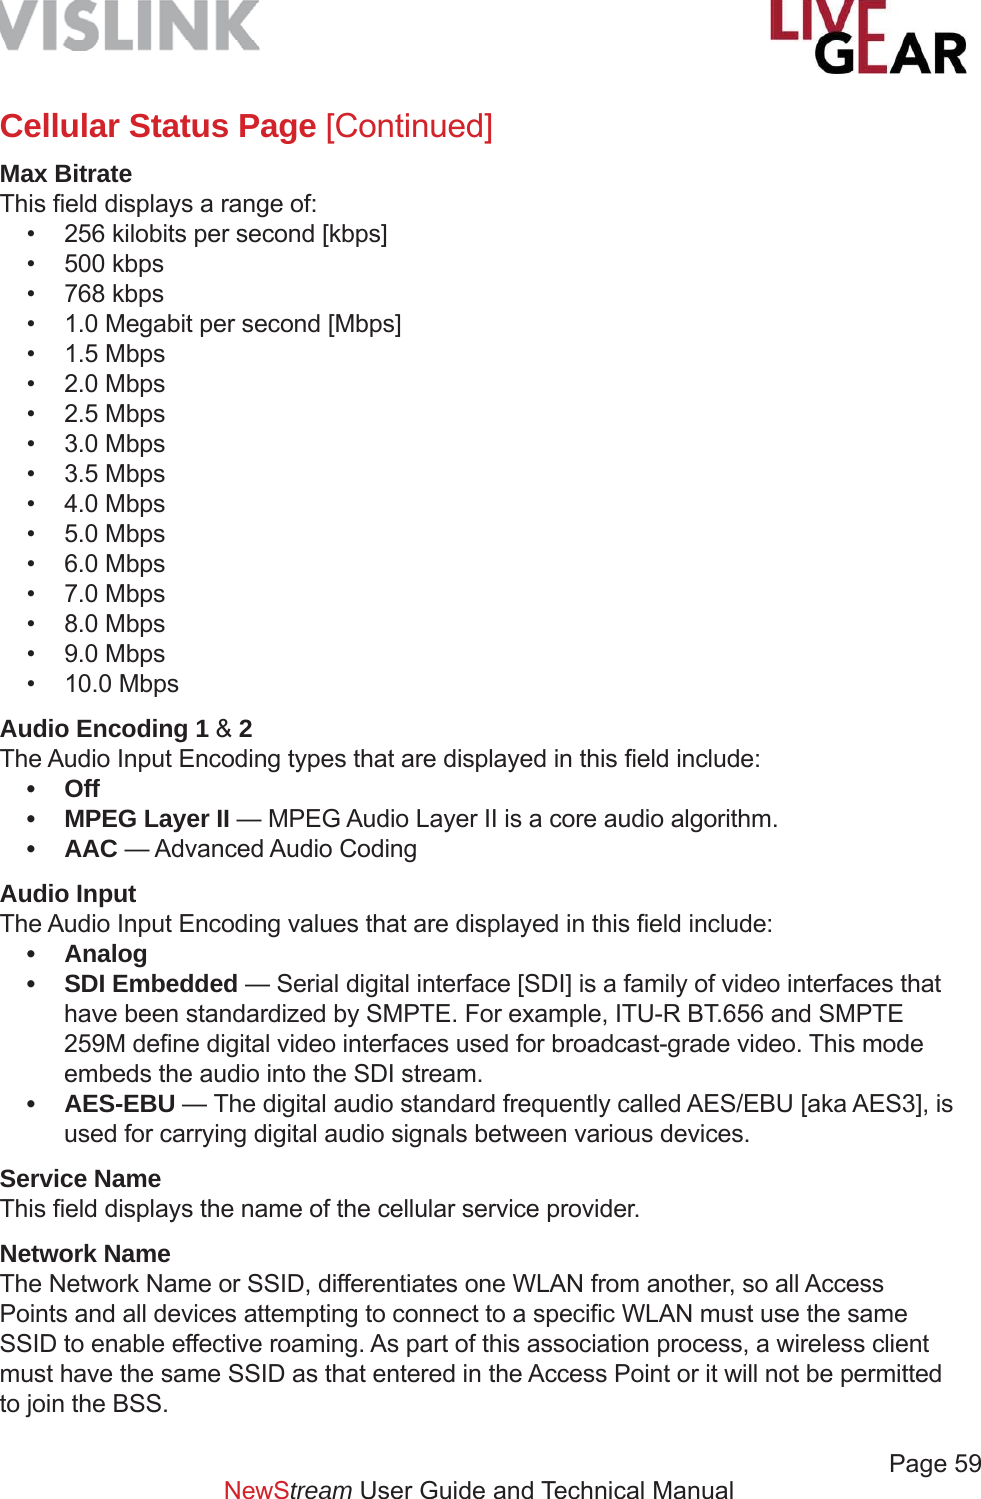             Page 59NewStream User Guide and Technical ManualCellular Status Page [Continued]Max BitrateThis ﬁ eld displays a range of:•  256 kilobits per second [kbps]• 500 kbps• 768 kbps•  1.0 Megabit per second [Mbps]• 1.5 Mbps• 2.0 Mbps• 2.5 Mbps• 3.0 Mbps• 3.5 Mbps• 4.0 Mbps• 5.0 Mbps• 6.0 Mbps• 7.0 Mbps• 8.0 Mbps• 9.0 Mbps• 10.0 MbpsAudio Encoding 1 &amp; 2The Audio Input Encoding types that are displayed in this ﬁ eld include:• Off•  MPEG Layer II — MPEG Audio Layer II is a core audio algorithm.• AAC — Advanced Audio Coding  Audio Input The Audio Input Encoding values that are displayed in this ﬁ eld include:• Analog  • SDI Embedded — Serial digital interface [SDI] is a family of video interfaces that have been standardized by SMPTE. For example, ITU-R BT.656 and SMPTE 259M deﬁ ne digital video interfaces used for broadcast-grade video. This mode embeds the audio into the SDI stream.• AES-EBU — The digital audio standard frequently called AES/EBU [aka AES3], is used for carrying digital audio signals between various devices.Service NameThis ﬁ eld displays the name of the cellular service provider.Network NameThe Network Name or SSID, differentiates one WLAN from another, so all Access Points and all devices attempting to connect to a speciﬁ c WLAN must use the same SSID to enable effective roaming. As part of this association process, a wireless client must have the same SSID as that entered in the Access Point or it will not be permitted to join the BSS.